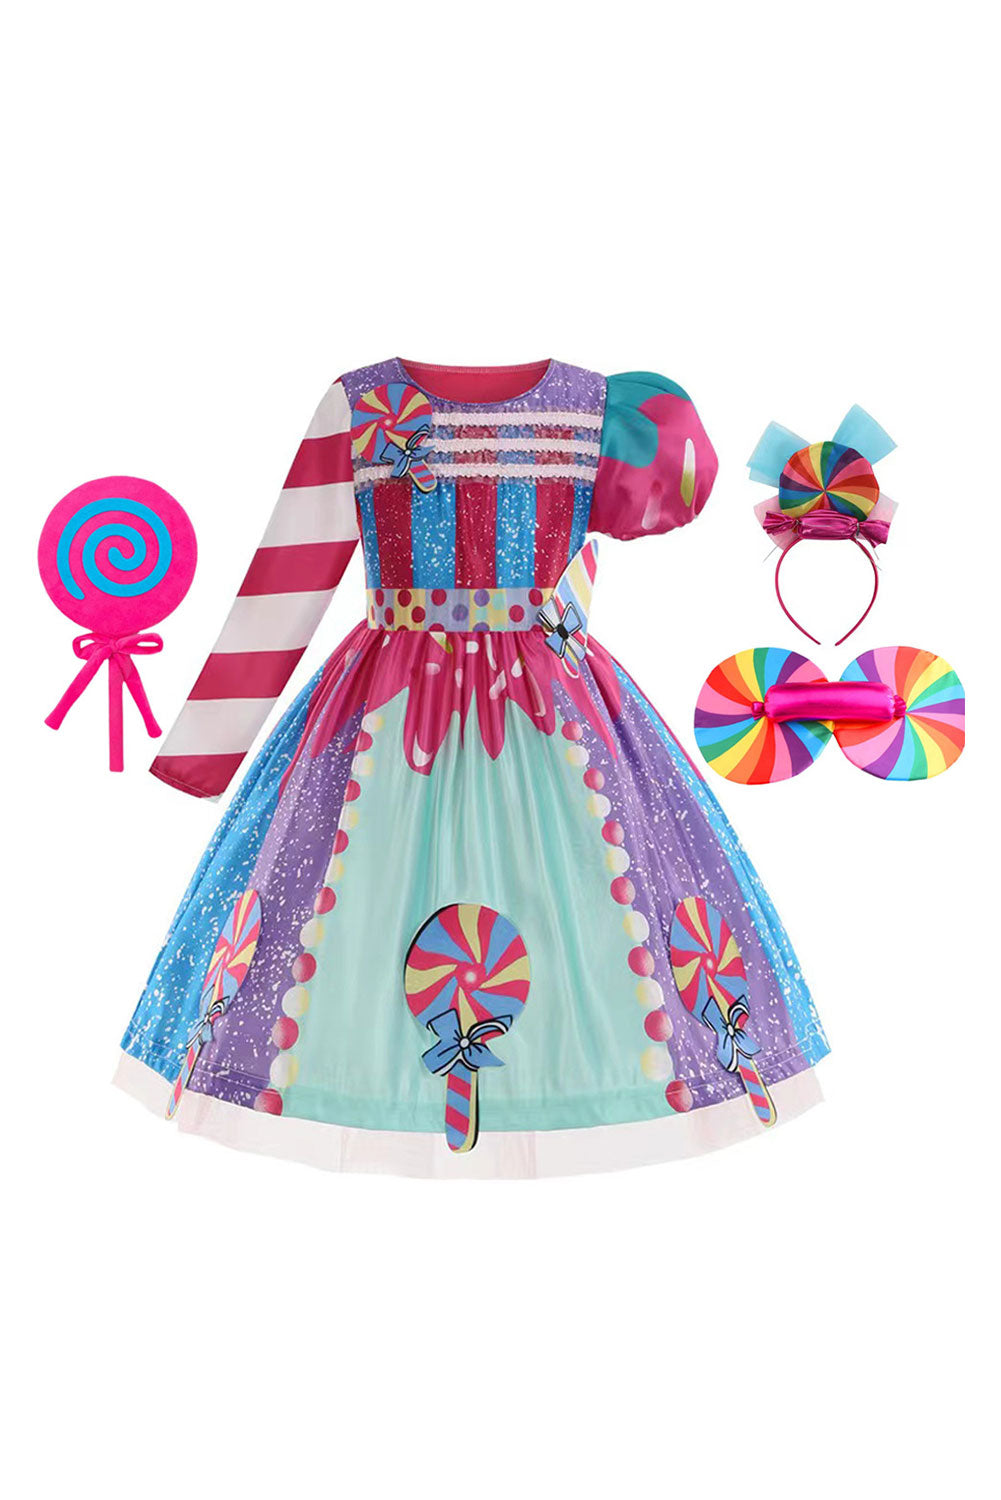 Candy Princess Dress Cosplay Costume Outfits Fantasia Halloween Carnival Party Disguise Suit